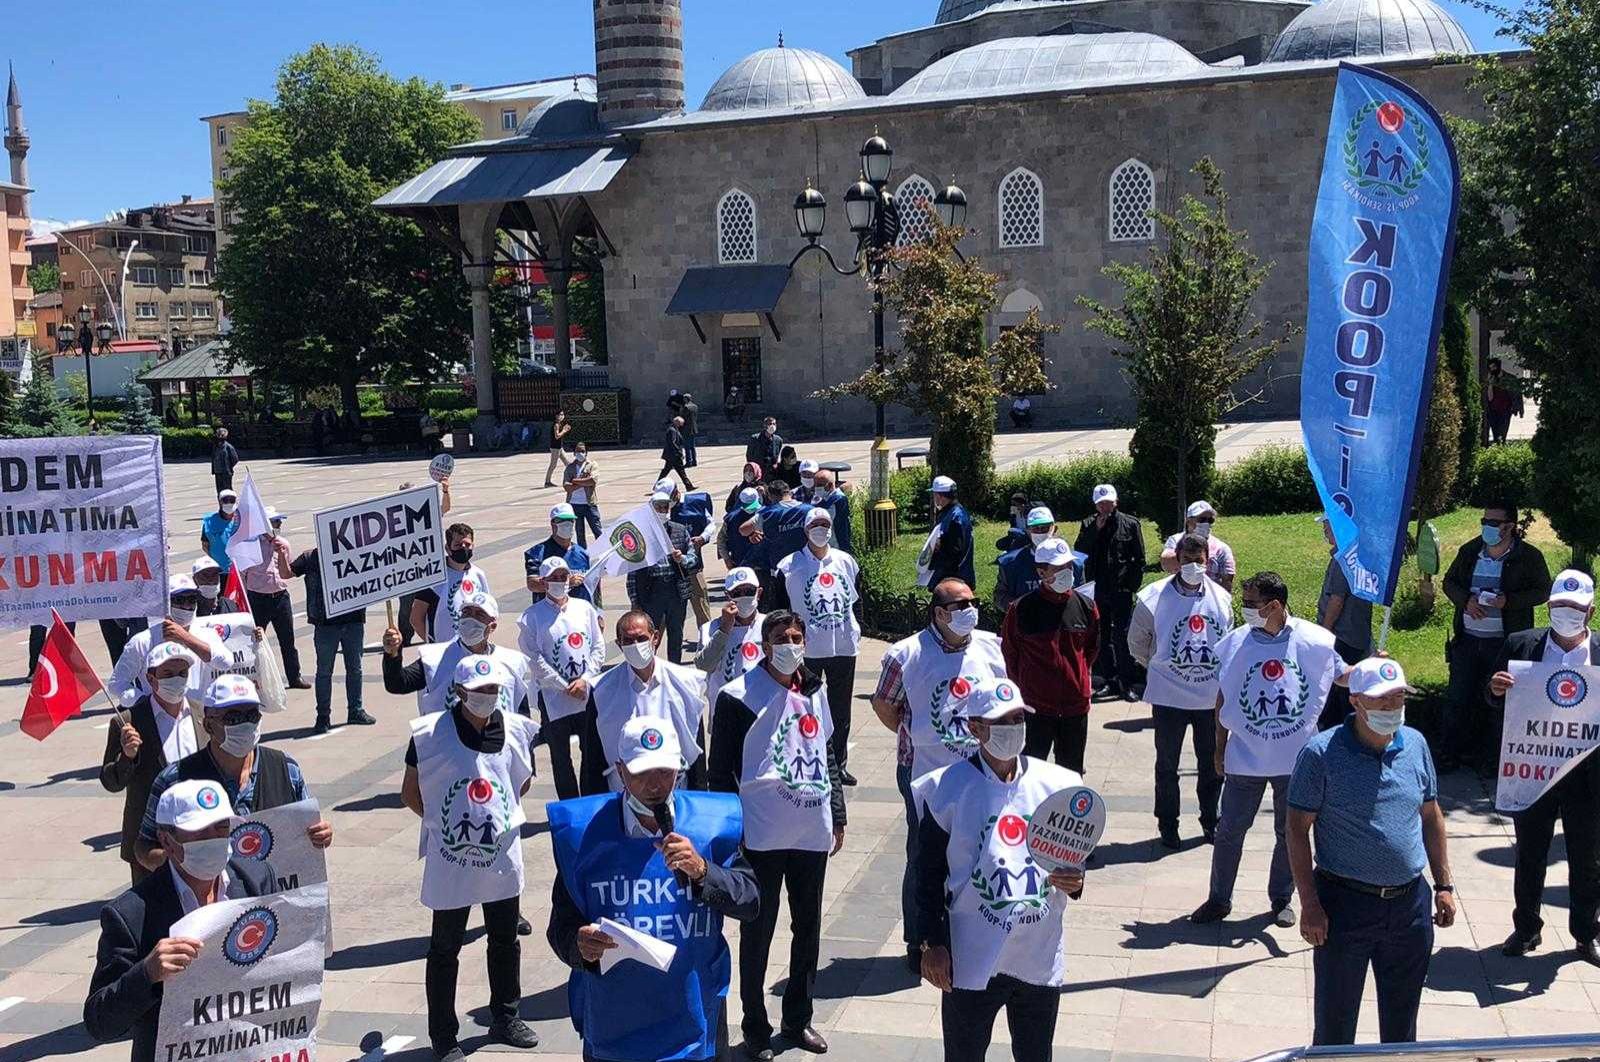 Heads and representatives of unions affiliated with TÜRK-IŞ gathered at Lala Paşa Square with banners reading "Don't touch my severance pay" and "severance pay is our red line" in eastern Erzurum province, Turkey, June 29, 2020. (AA Photo)